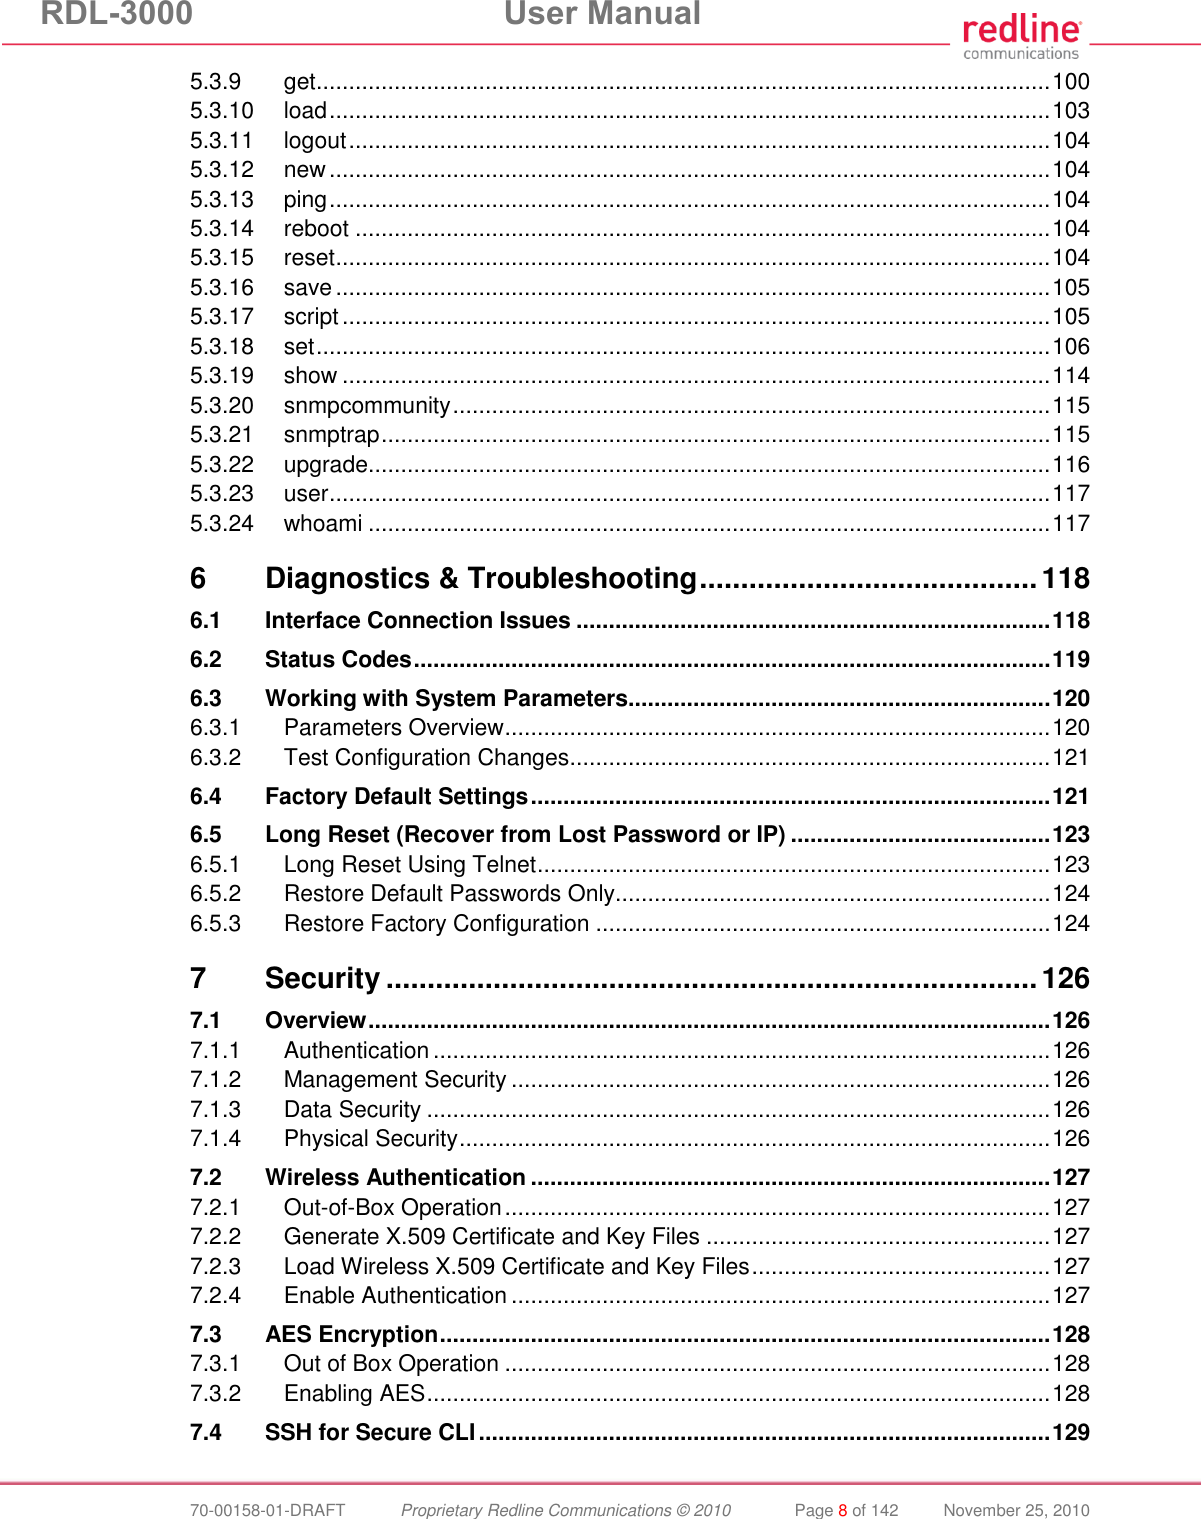 RDL-3000  User Manual  70-00158-01-DRAFT  Proprietary Redline Communications © 2010  Page 8 of 142  November 25, 2010 5.3.9 get ................................................................................................................. 100 5.3.10 load ............................................................................................................... 103 5.3.11 logout ............................................................................................................ 104 5.3.12 new ............................................................................................................... 104 5.3.13 ping ............................................................................................................... 104 5.3.14 reboot ........................................................................................................... 104 5.3.15 reset .............................................................................................................. 104 5.3.16 save .............................................................................................................. 105 5.3.17 script ............................................................................................................. 105 5.3.18 set ................................................................................................................. 106 5.3.19 show ............................................................................................................. 114 5.3.20 snmpcommunity ............................................................................................ 115 5.3.21 snmptrap ....................................................................................................... 115 5.3.22 upgrade ......................................................................................................... 116 5.3.23 user ............................................................................................................... 117 5.3.24 whoami ......................................................................................................... 117 6 Diagnostics &amp; Troubleshooting ......................................... 118 6.1 Interface Connection Issues ......................................................................... 118 6.2 Status Codes .................................................................................................. 119 6.3 Working with System Parameters................................................................. 120 6.3.1 Parameters Overview .................................................................................... 120 6.3.2 Test Configuration Changes .......................................................................... 121 6.4 Factory Default Settings ................................................................................ 121 6.5 Long Reset (Recover from Lost Password or IP) ........................................ 123 6.5.1 Long Reset Using Telnet ............................................................................... 123 6.5.2 Restore Default Passwords Only................................................................... 124 6.5.3 Restore Factory Configuration ...................................................................... 124 7 Security ............................................................................... 126 7.1 Overview ......................................................................................................... 126 7.1.1 Authentication ............................................................................................... 126 7.1.2 Management Security ................................................................................... 126 7.1.3 Data Security ................................................................................................ 126 7.1.4 Physical Security ........................................................................................... 126 7.2 Wireless Authentication ................................................................................ 127 7.2.1 Out-of-Box Operation .................................................................................... 127 7.2.2 Generate X.509 Certificate and Key Files ..................................................... 127 7.2.3 Load Wireless X.509 Certificate and Key Files .............................................. 127 7.2.4 Enable Authentication ................................................................................... 127 7.3 AES Encryption .............................................................................................. 128 7.3.1 Out of Box Operation .................................................................................... 128 7.3.2 Enabling AES ................................................................................................ 128 7.4 SSH for Secure CLI ........................................................................................ 129 